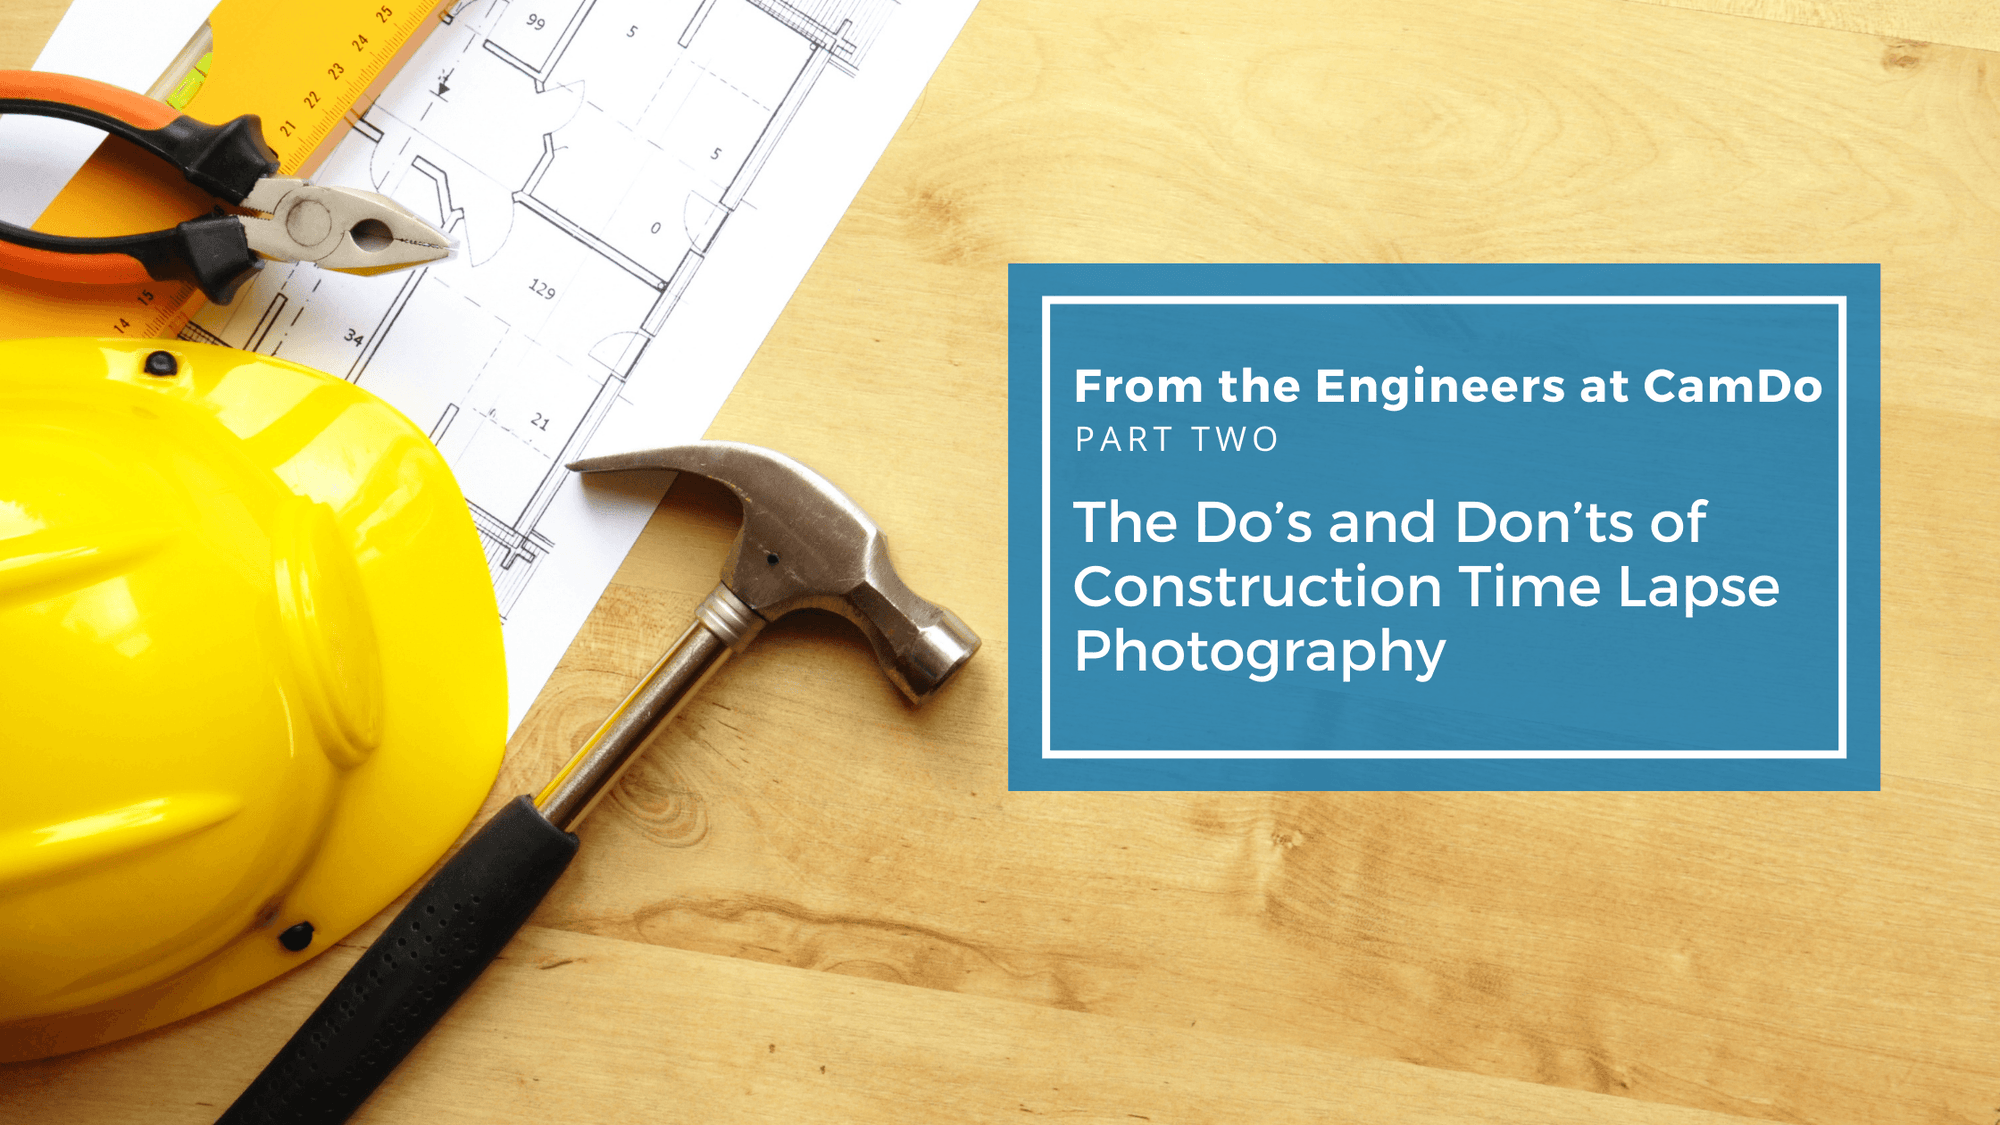 Part Two: The Do’s and Don’ts of Construction Time Lapse Photography